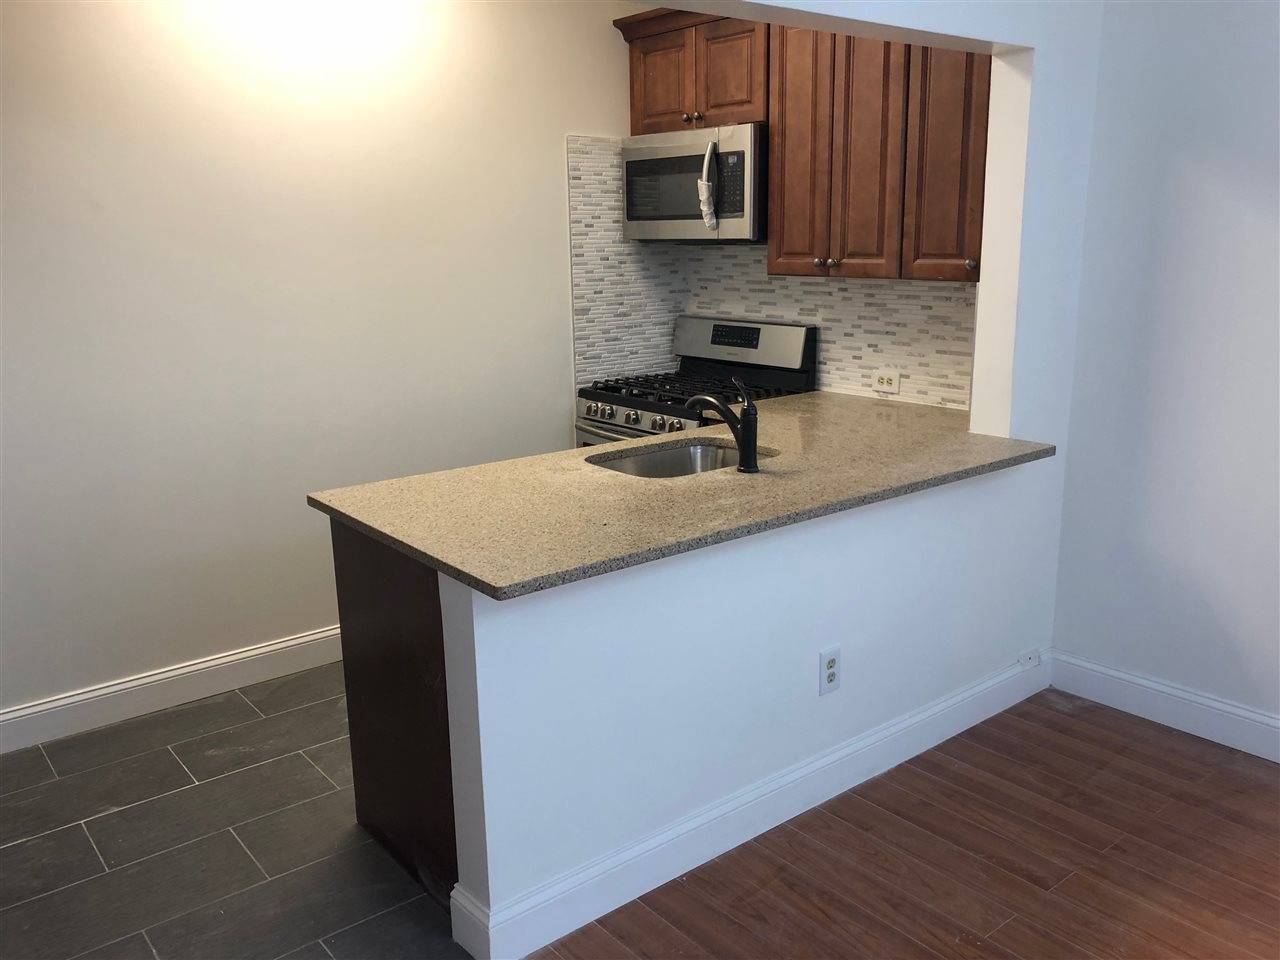 Newly renovated 1BR apartment in elevator building with parking included in amazing downtown Hoboken location